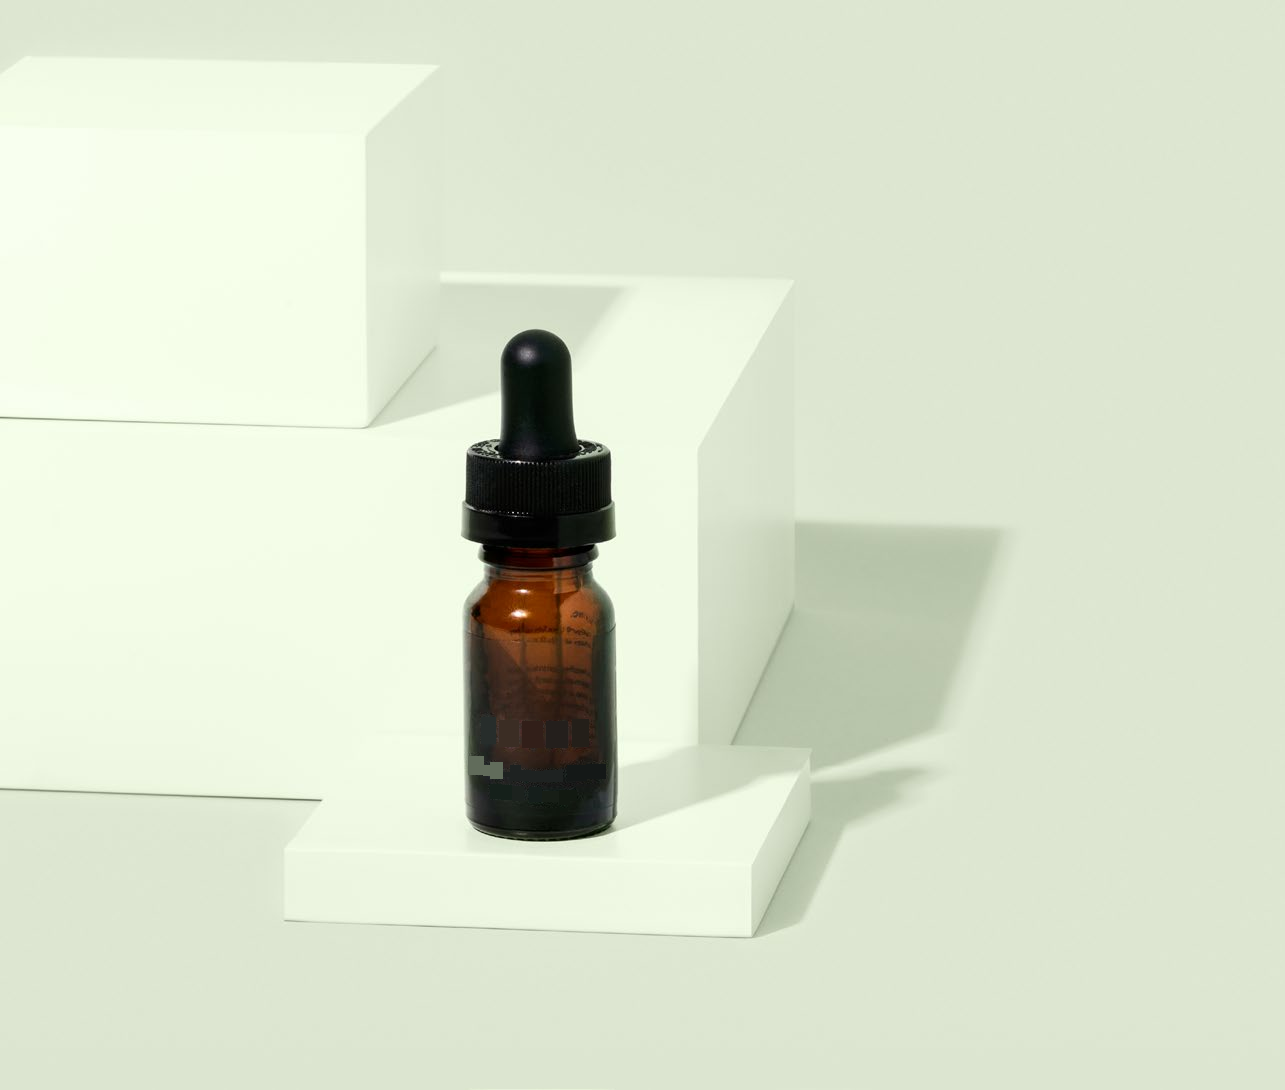 Suthe Water Soluble CBD Drops